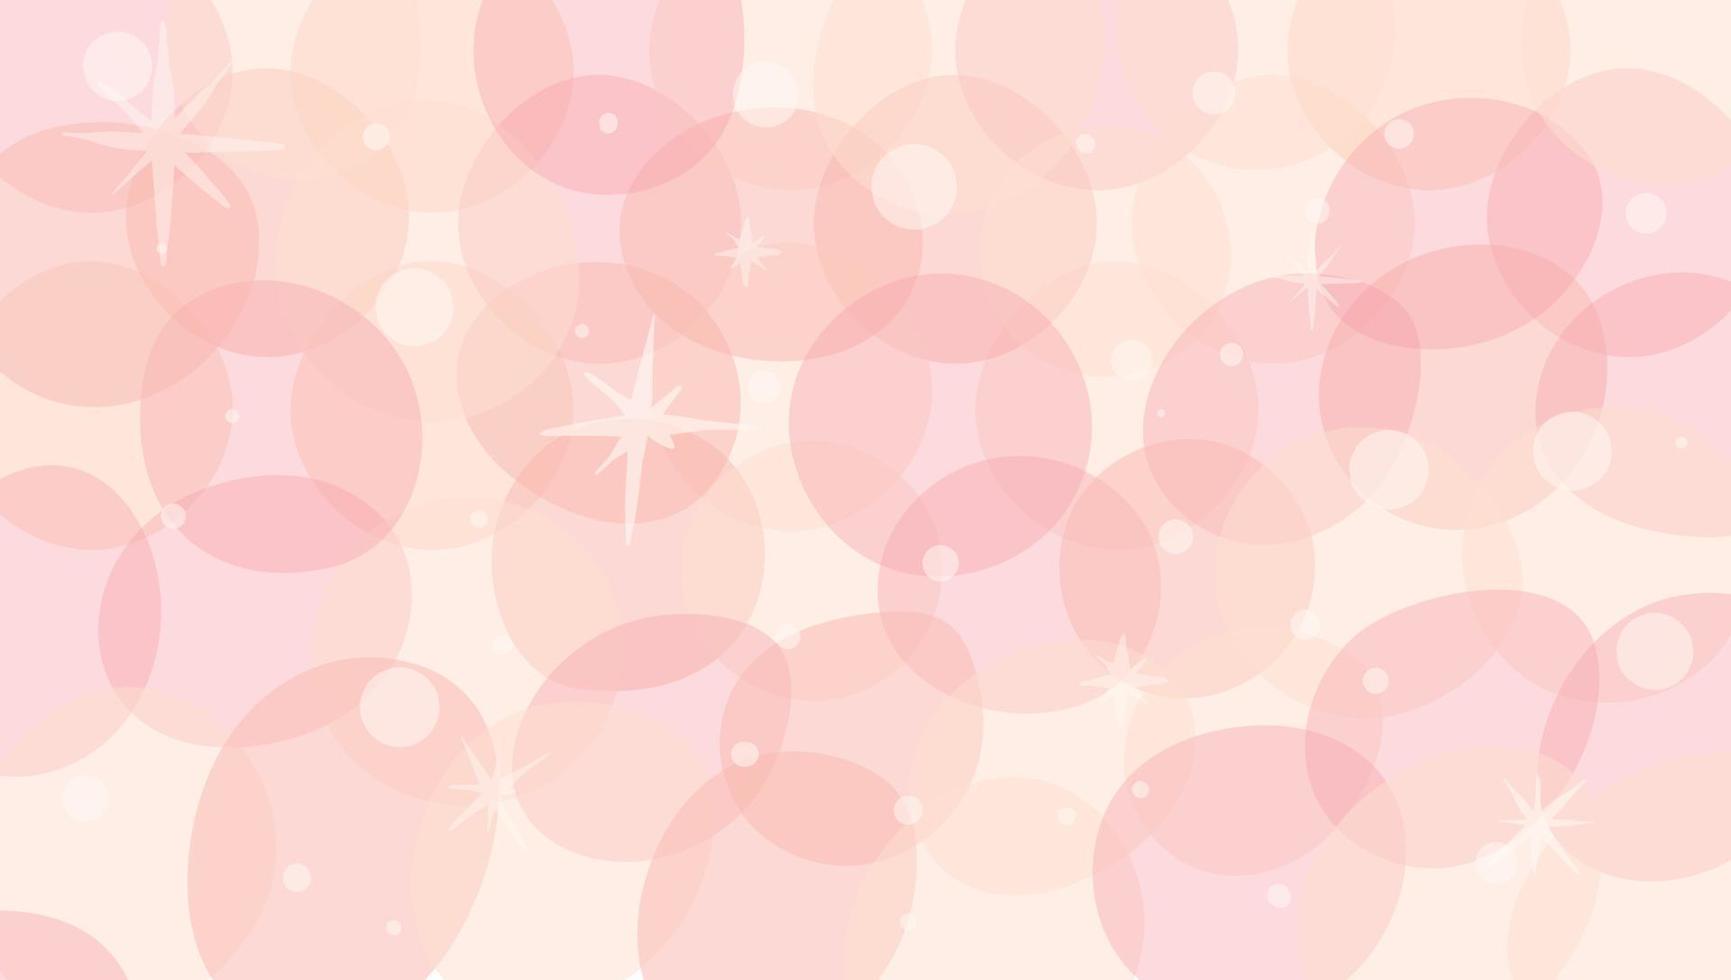 Vector abstract horizontal background. Simple transparent gradient circles in various sizes in delicate pinks with sparkles or shine. Wallpaper decor idea.